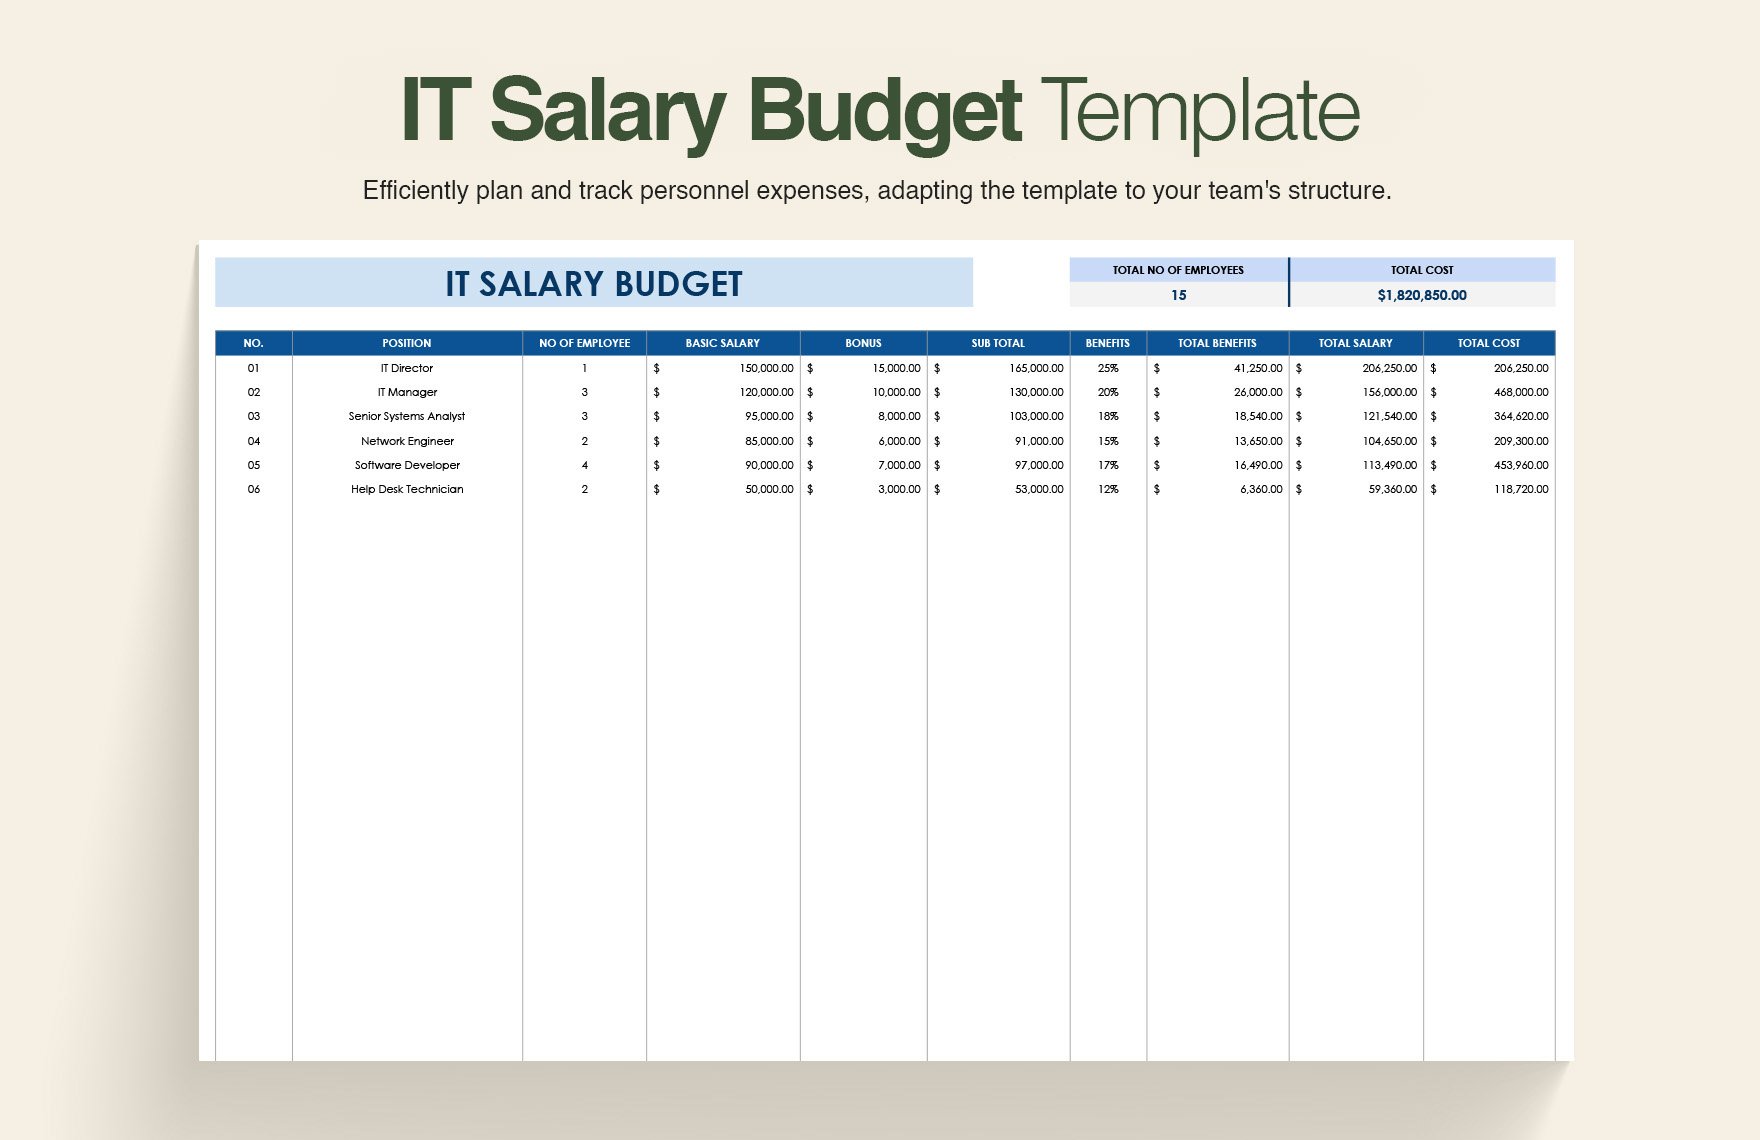 10+ IT Services & Consulting Budget Template Bundle